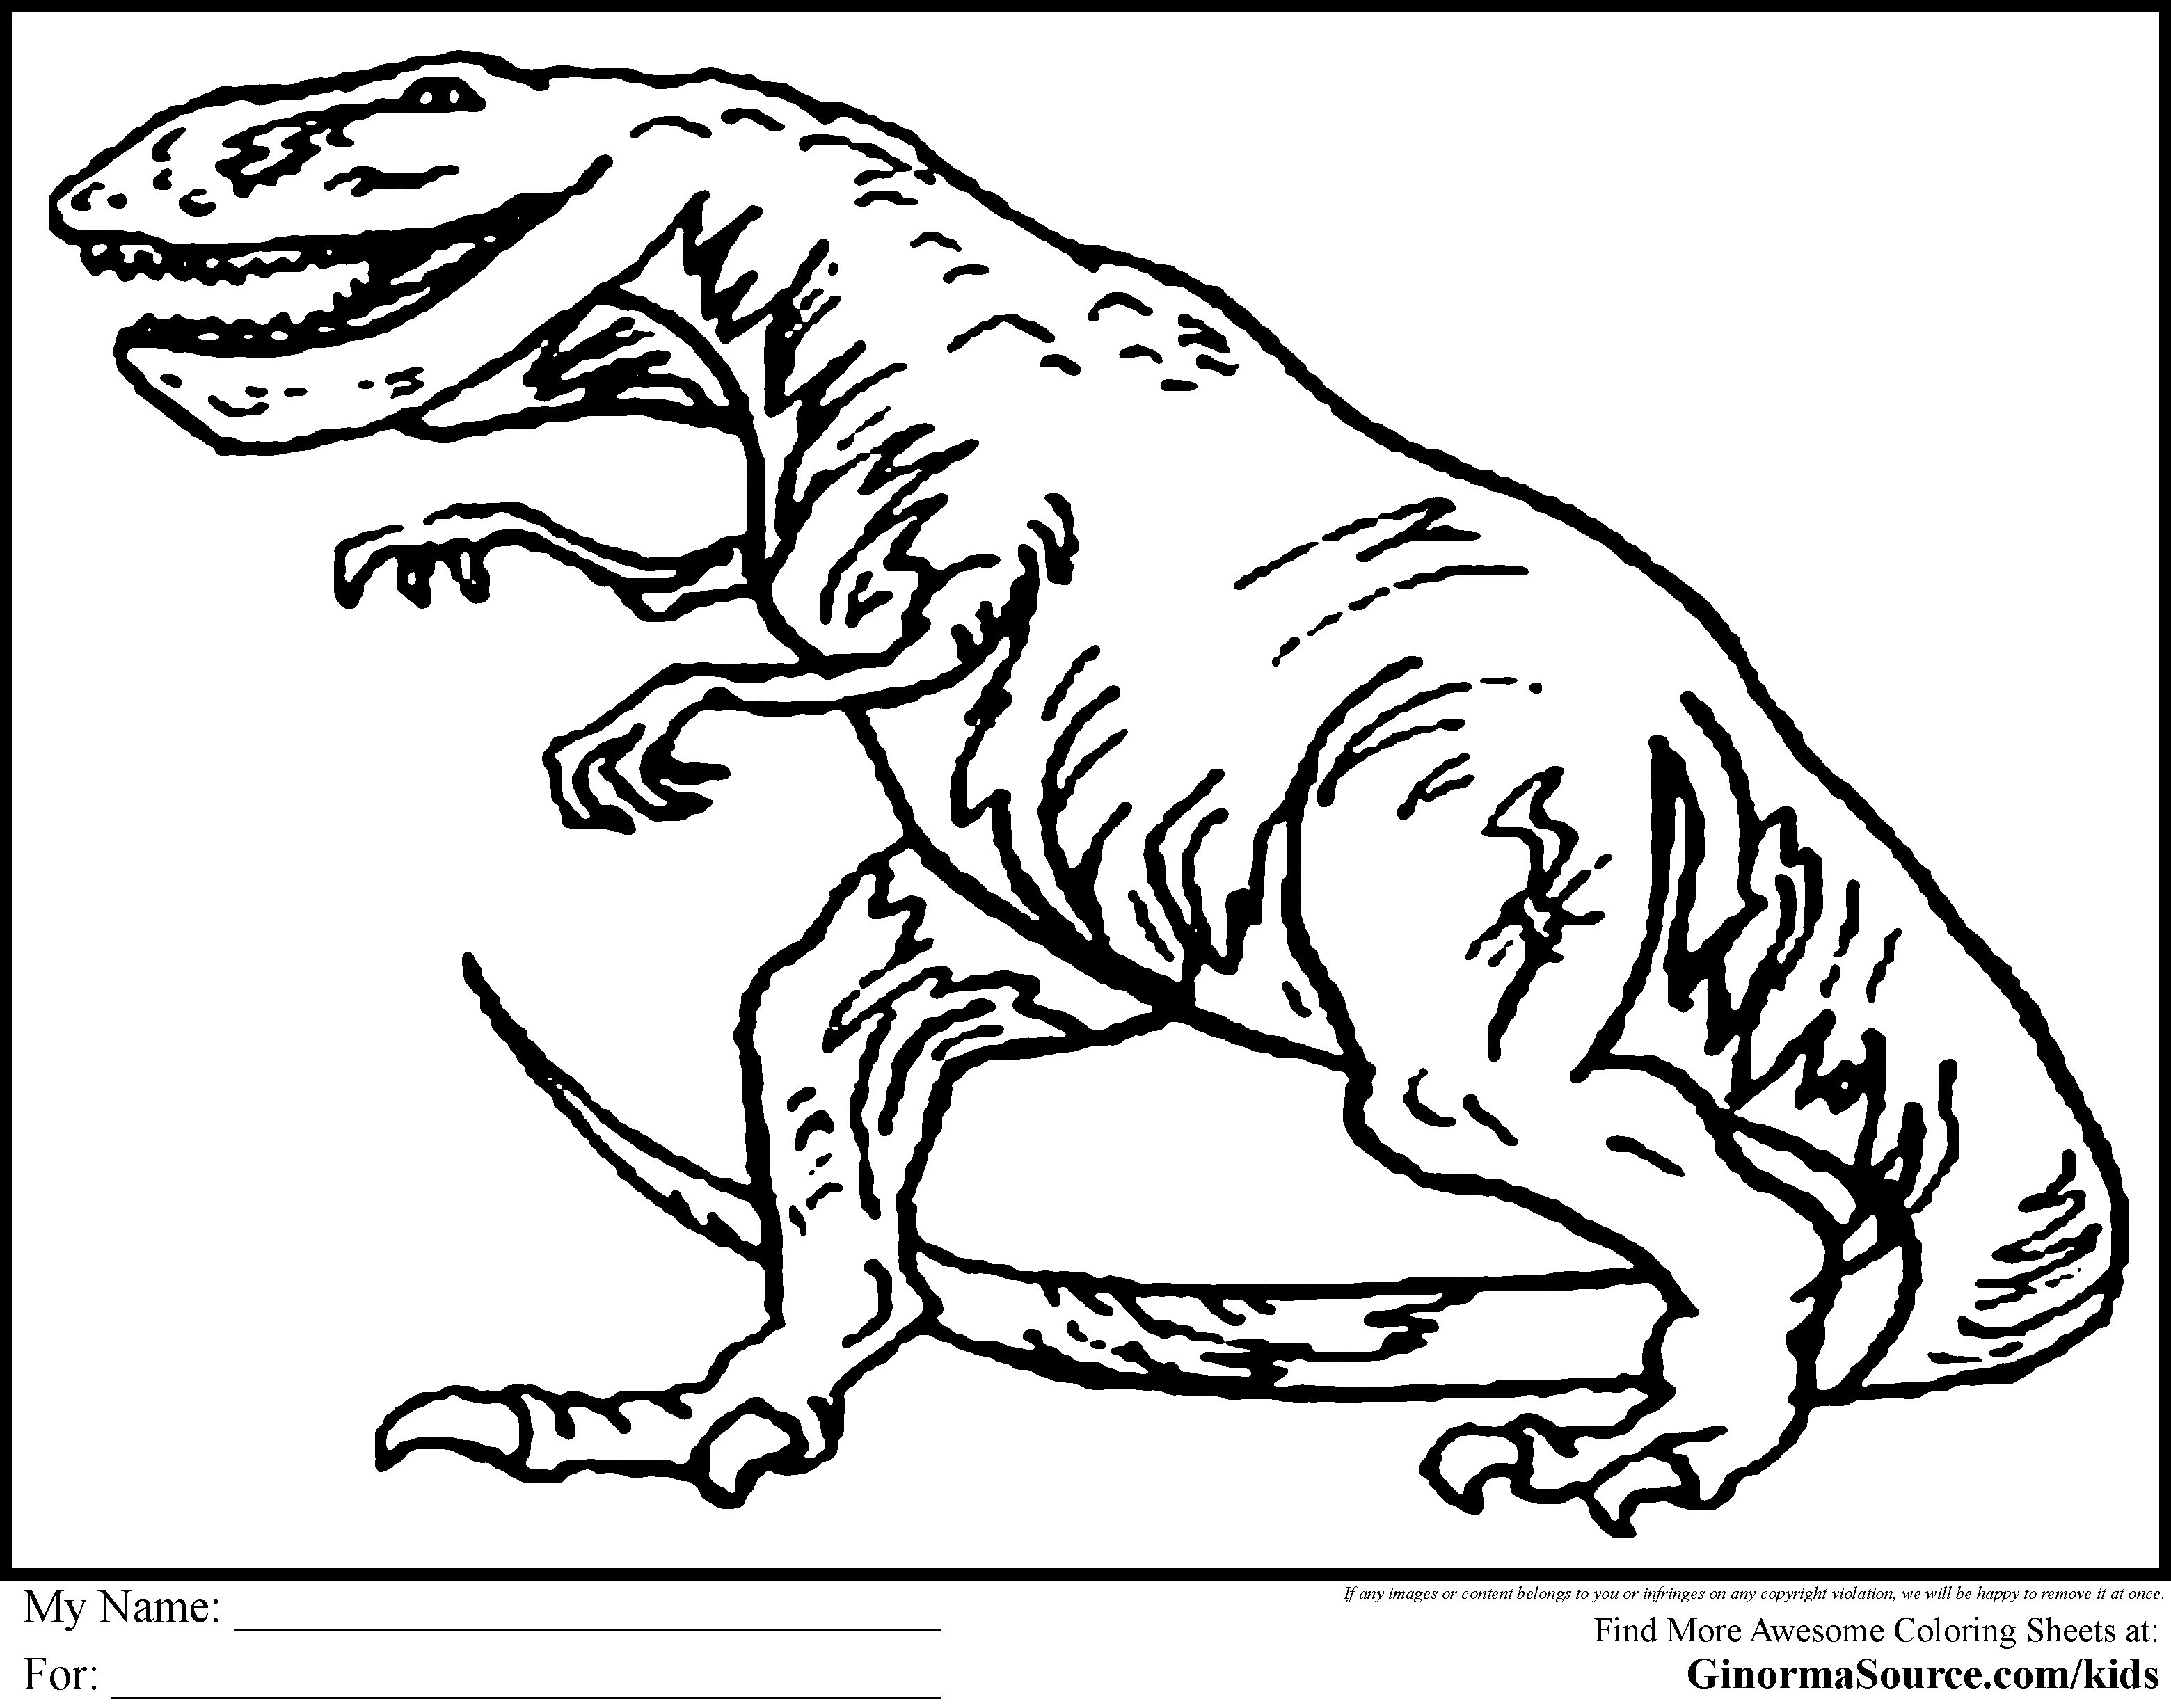 Animal Dinosaurs Coloring Pages Best Dinosaur For Kids 19 Dino Squad